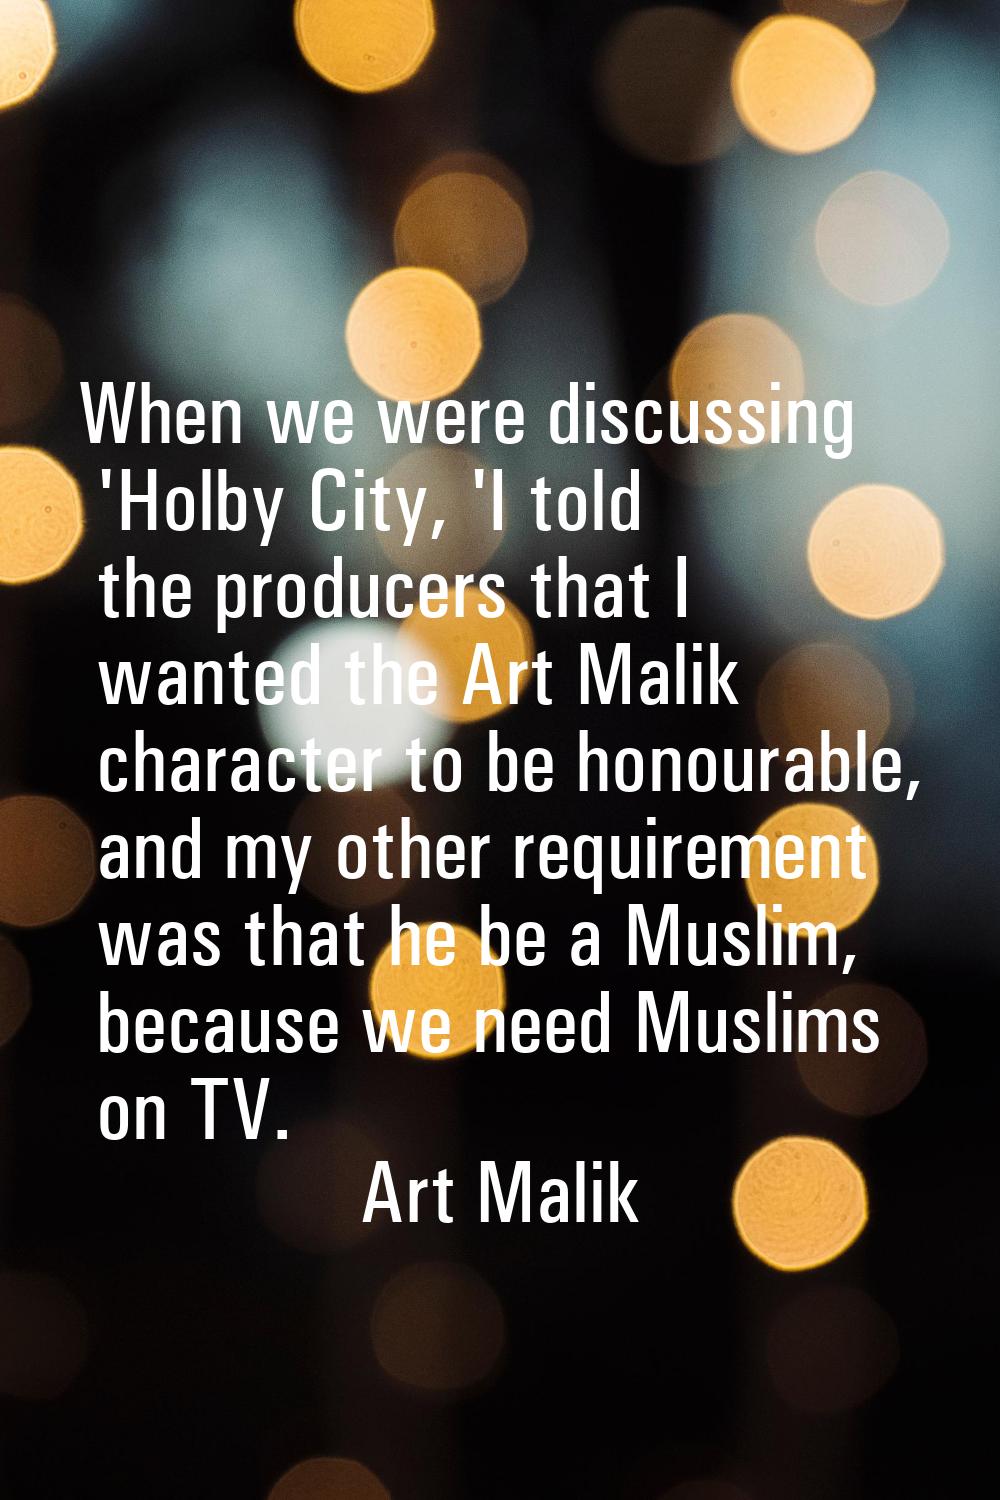 When we were discussing 'Holby City, 'I told the producers that I wanted the Art Malik character to